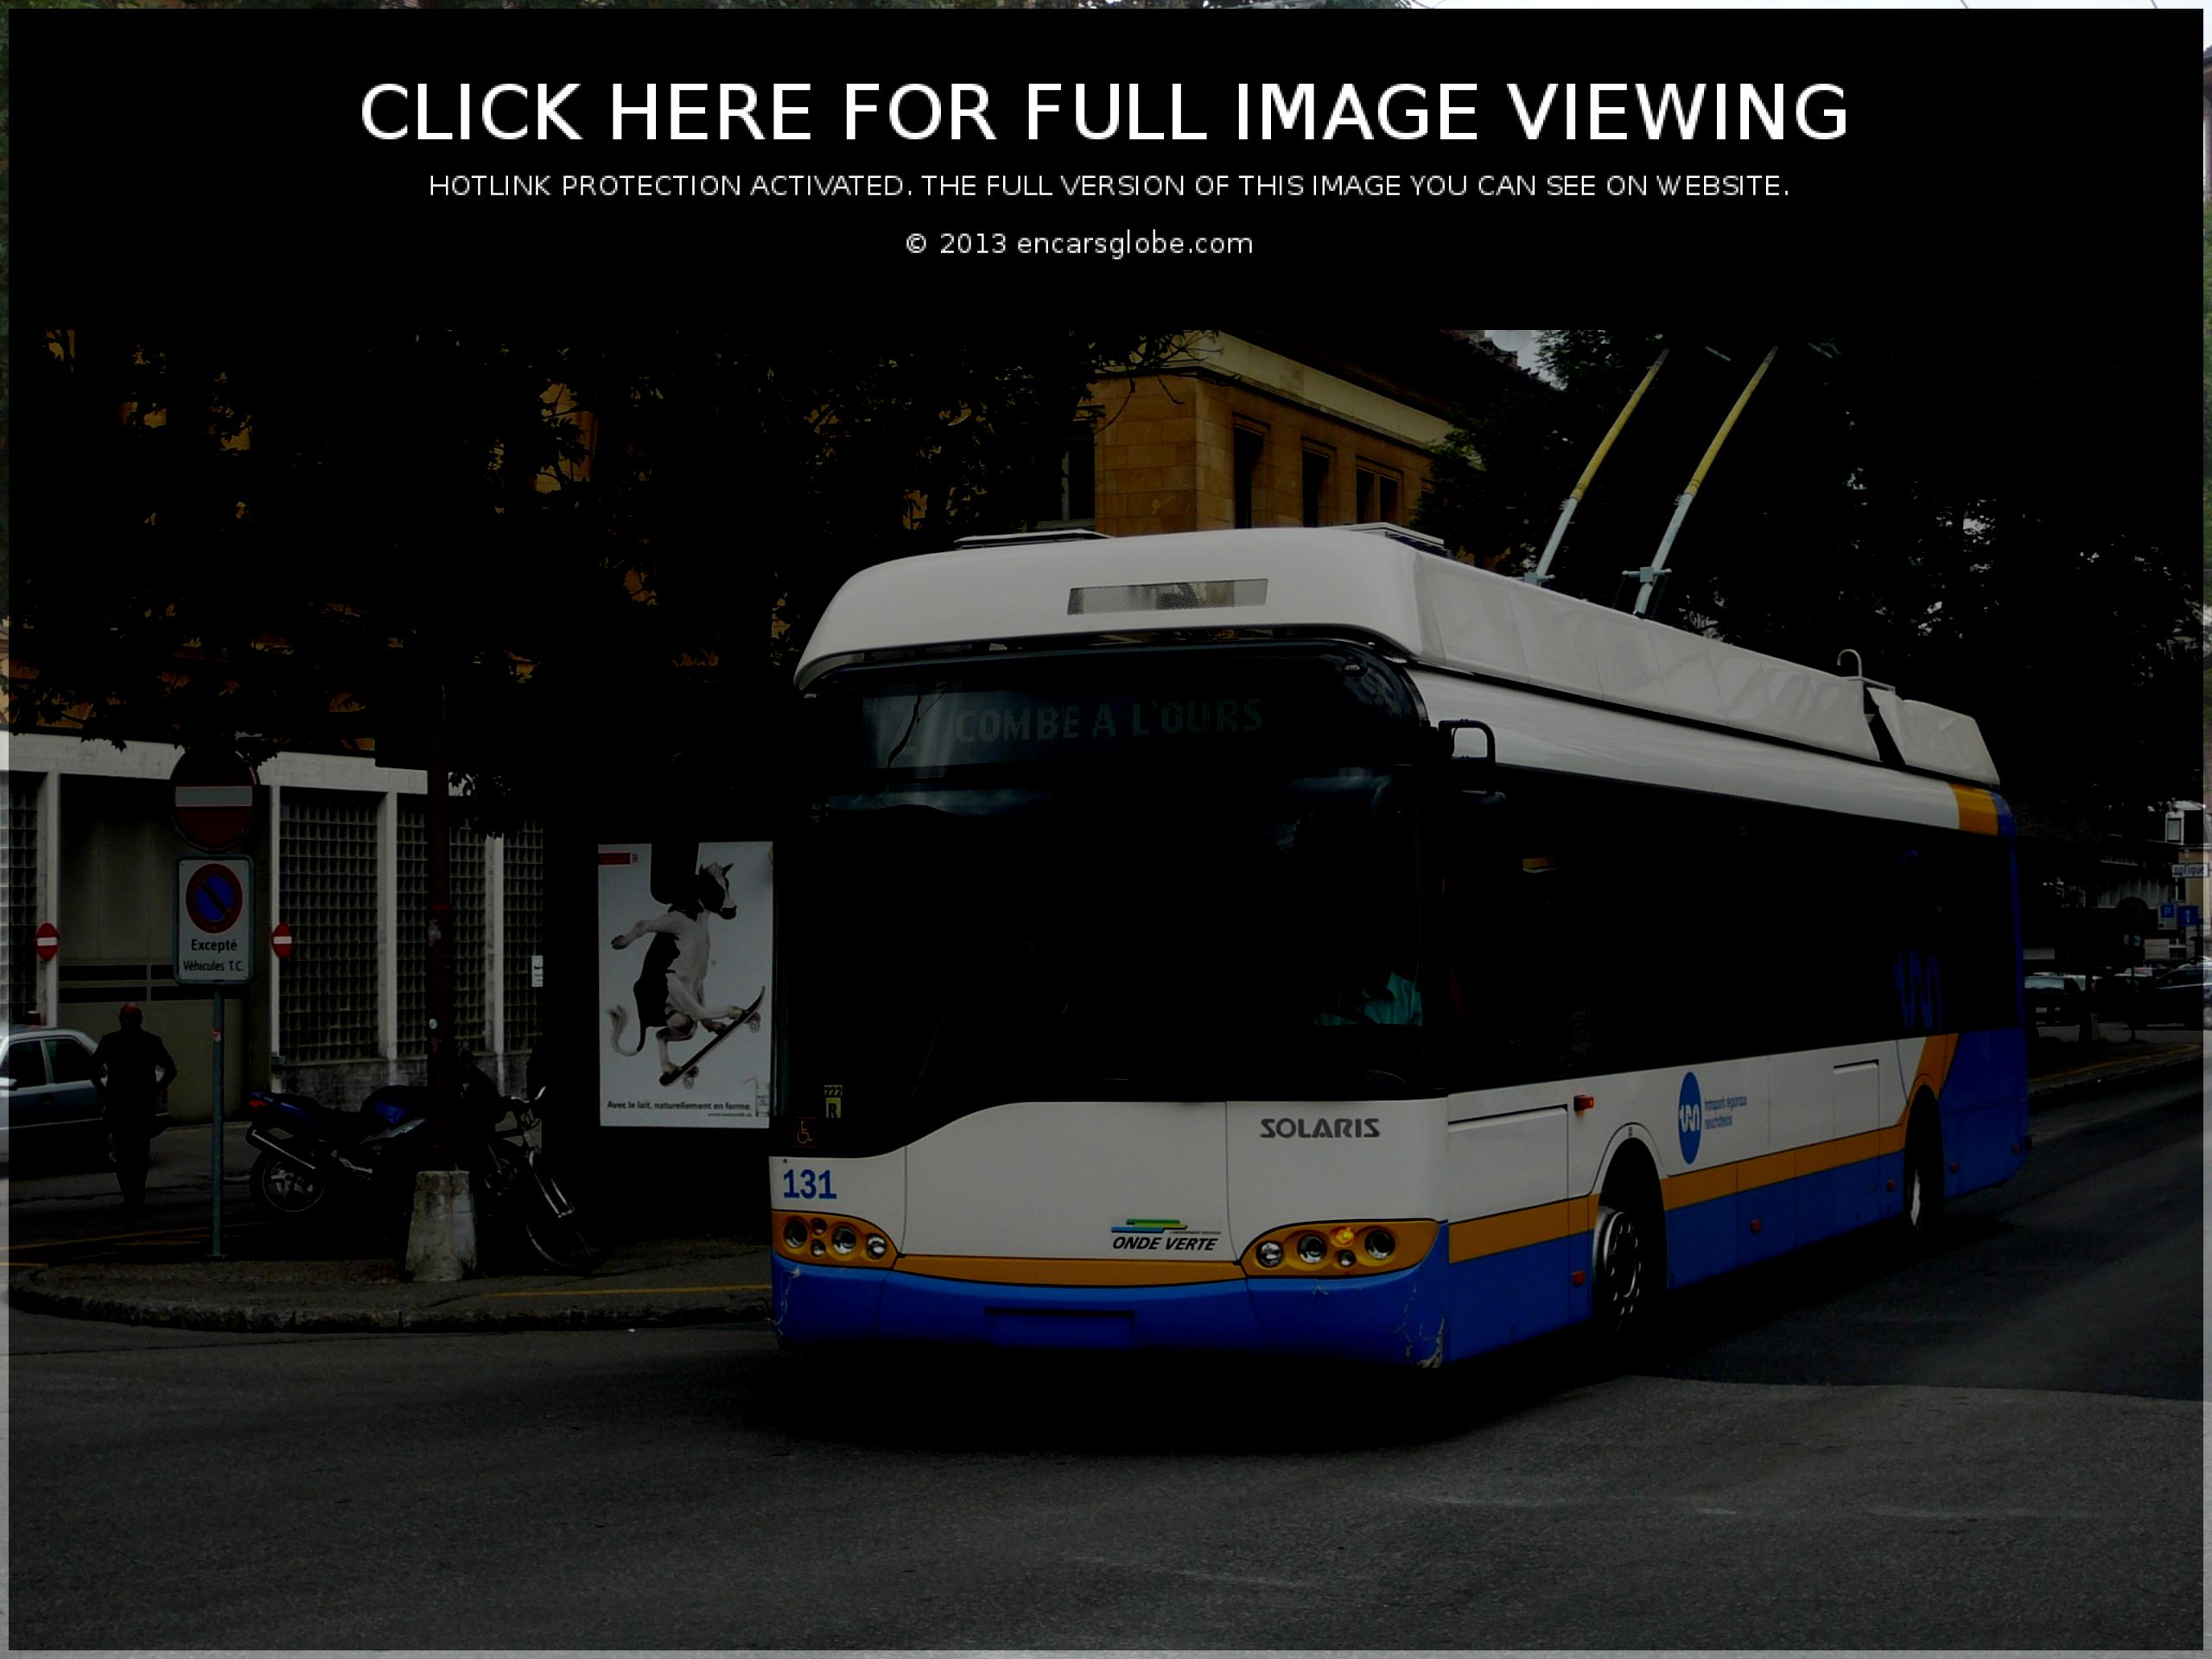 Solaris Trolley-bus Photo Gallery: Photo #02 out of 11, Image Size ...